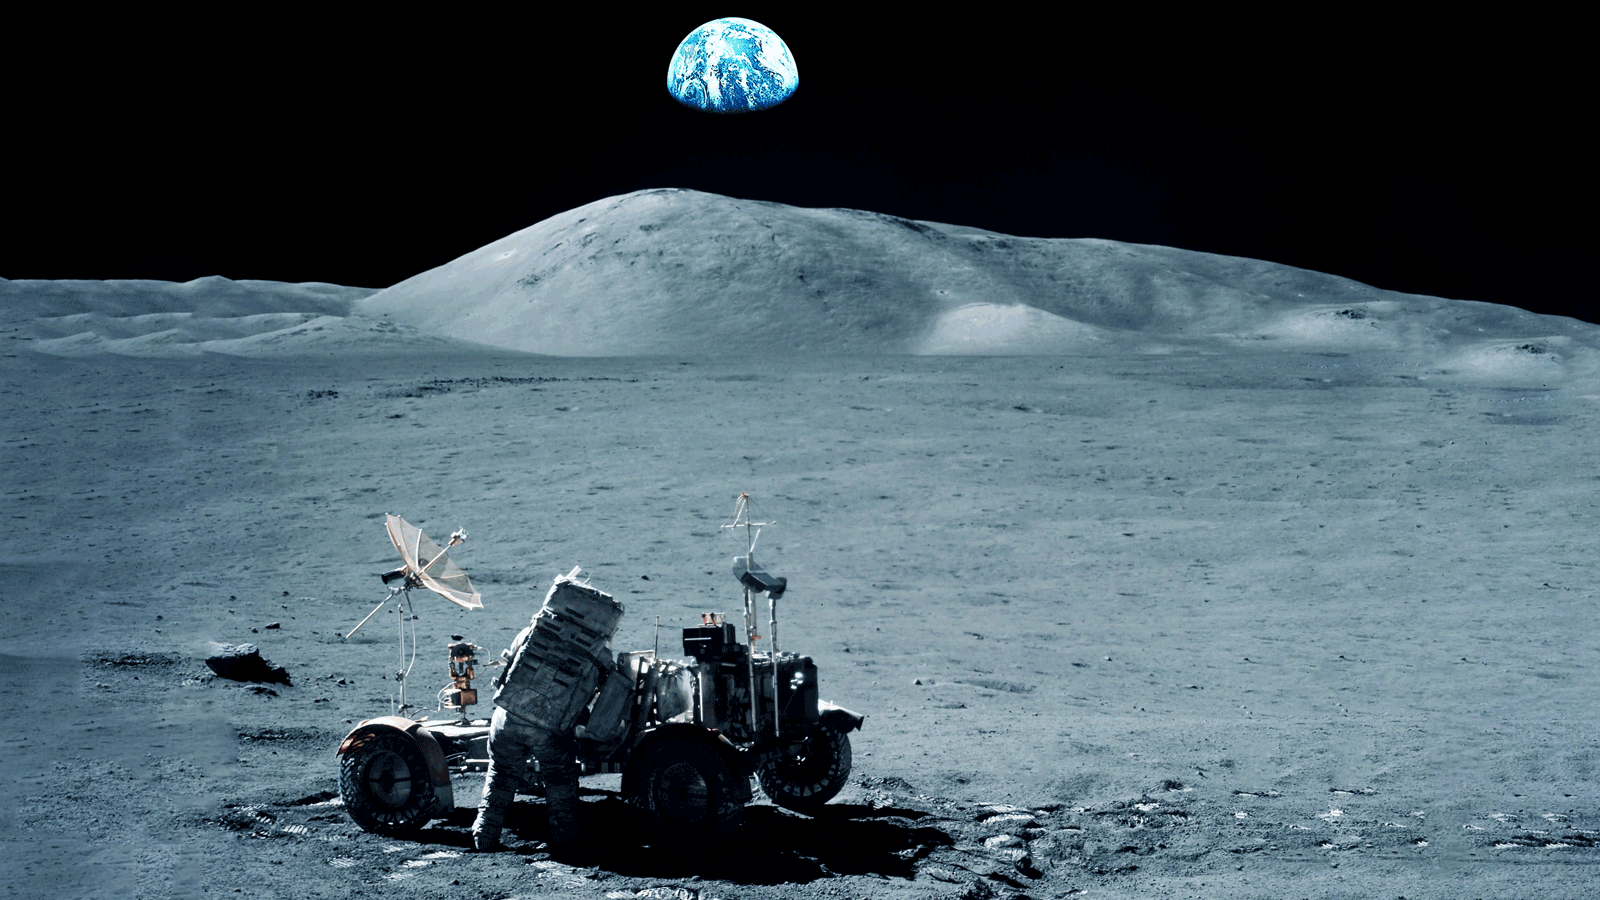 Japan signs Nasa deal to design lunar rover and land astronaut on the Moon